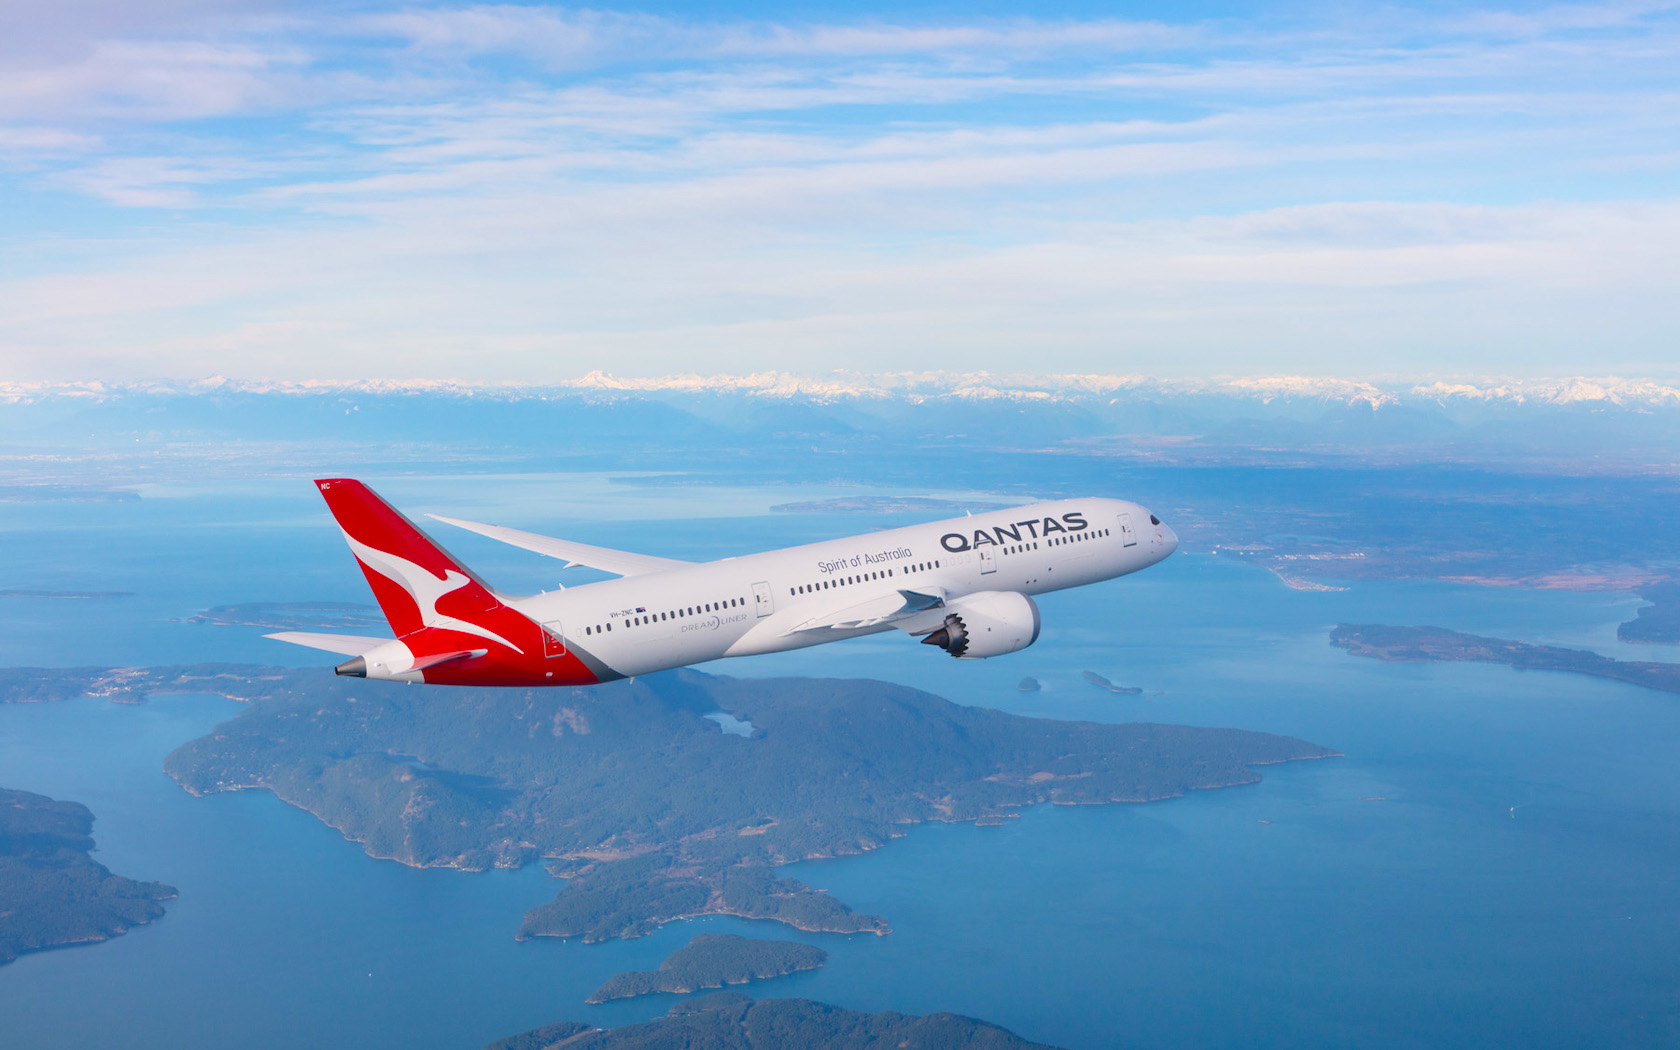 Qantas Is Testing World's Longest Direct Flight From New York To Sydney on a Boeing 787-9 Dreamliner